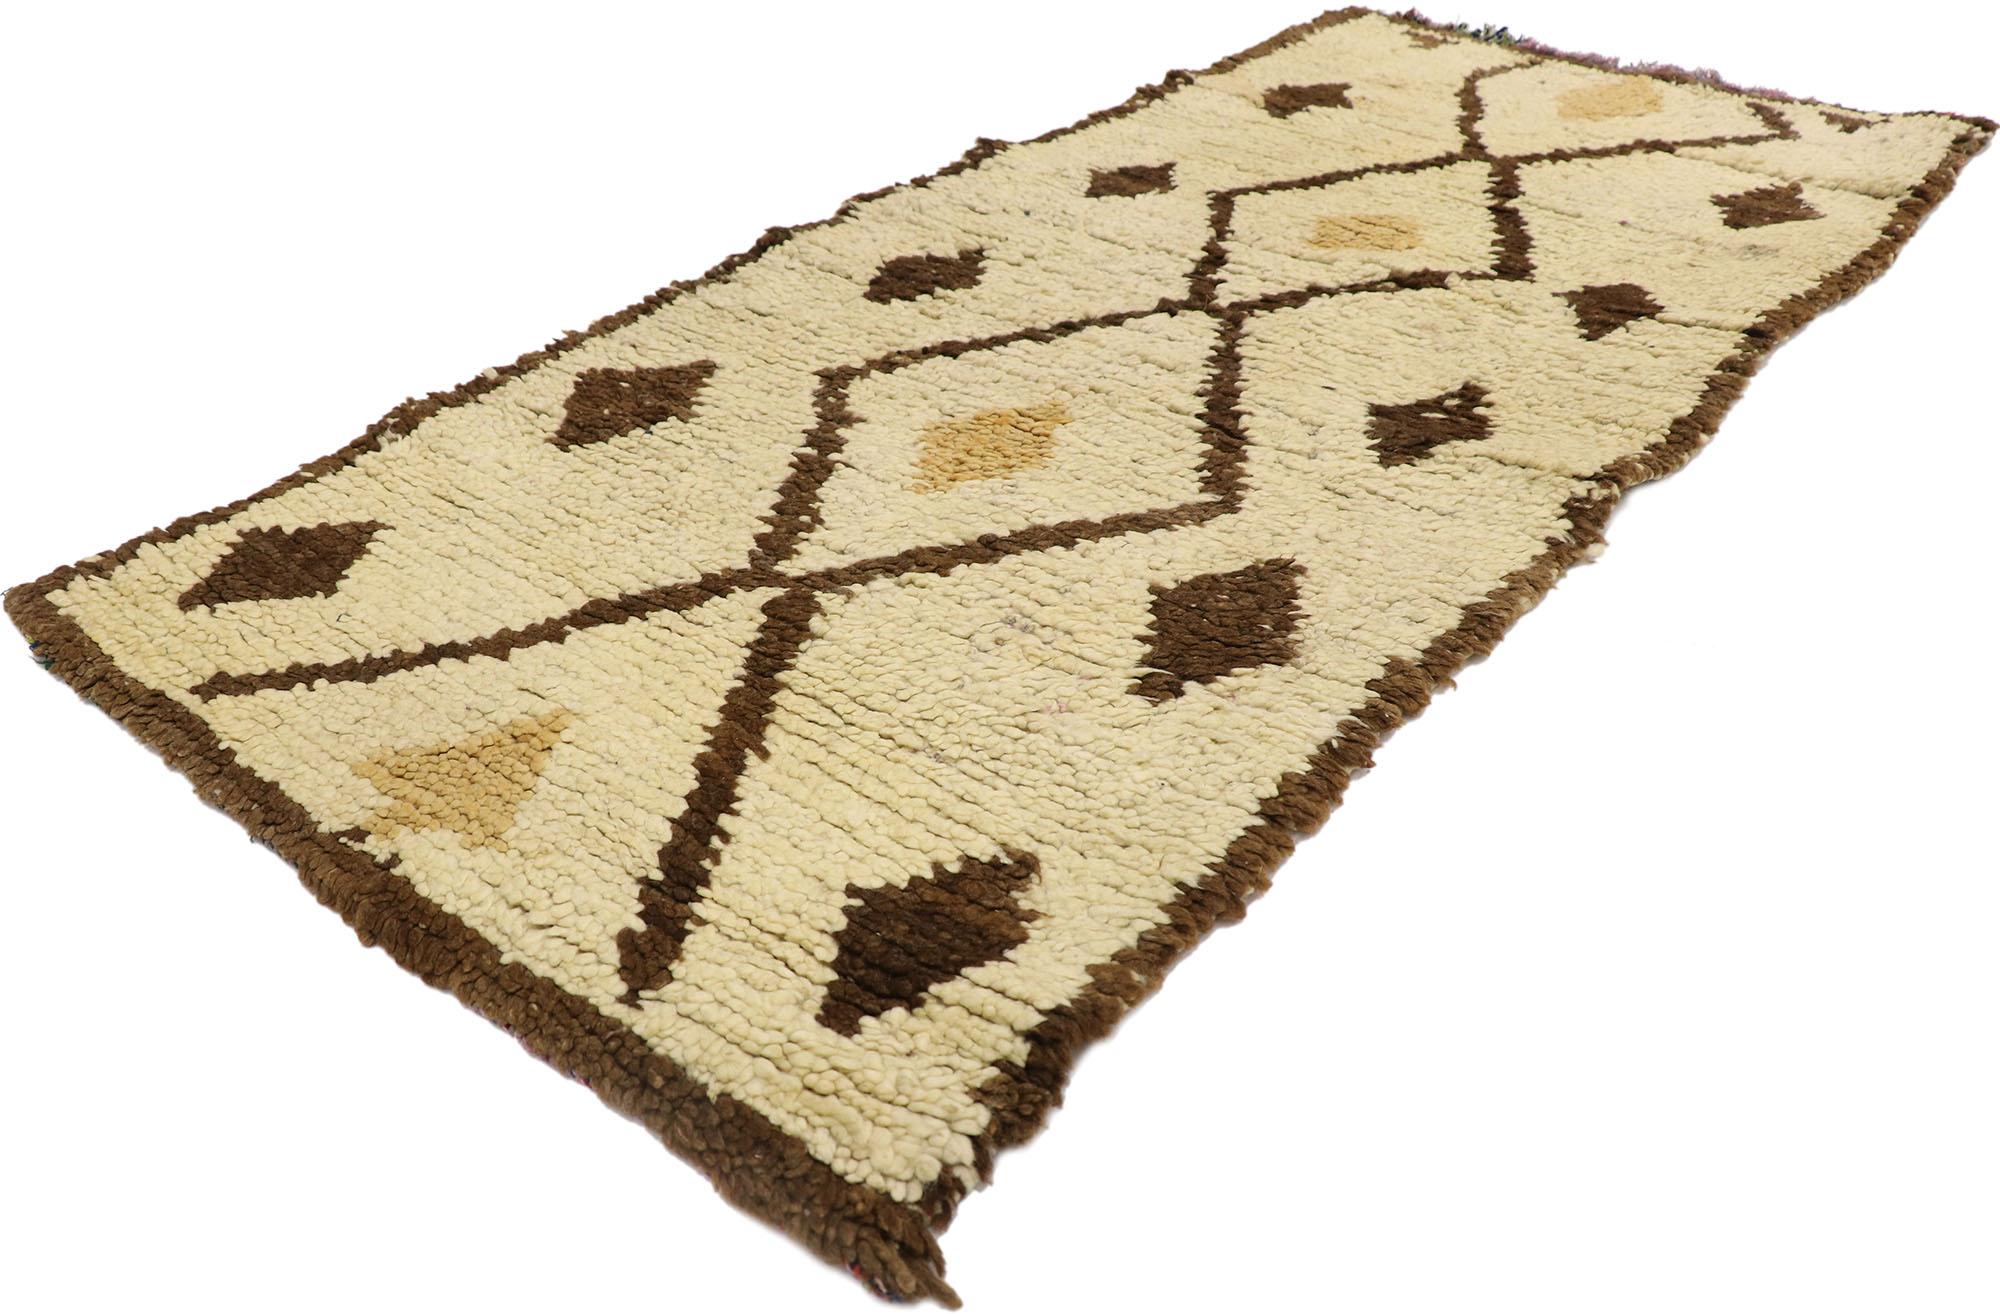 21551 vintage Berber Moroccan Azilal rug with Mid-Century Modern style 02'05 x 05'02. With its simplicity, incredible detail and texture, this hand knotted wool vintage Berber Moroccan Azilal rug is a captivating vision of woven beauty. The abrashed